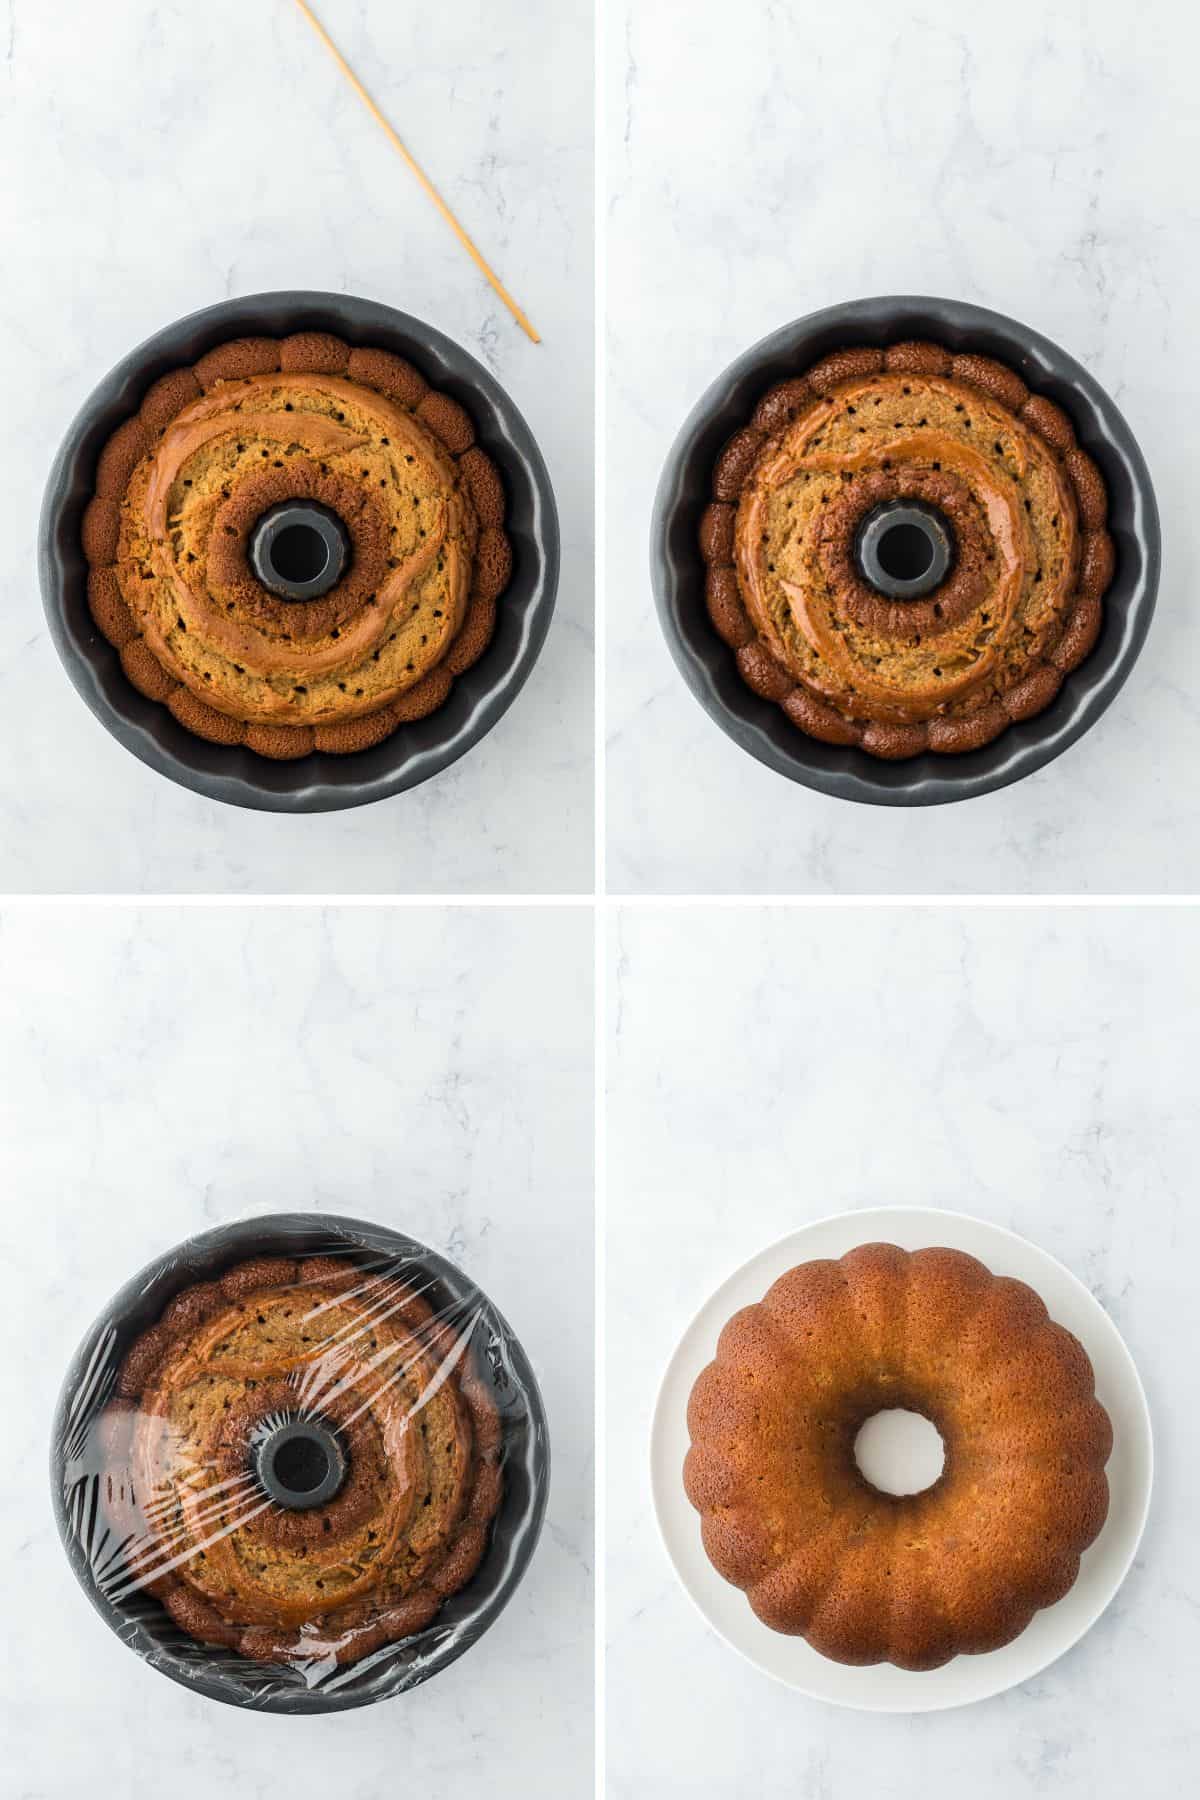 A step by step image collage on how to make rum cake with poking holes all around the cake, pouring the syrup over the holes, and covering the cake to let it rest